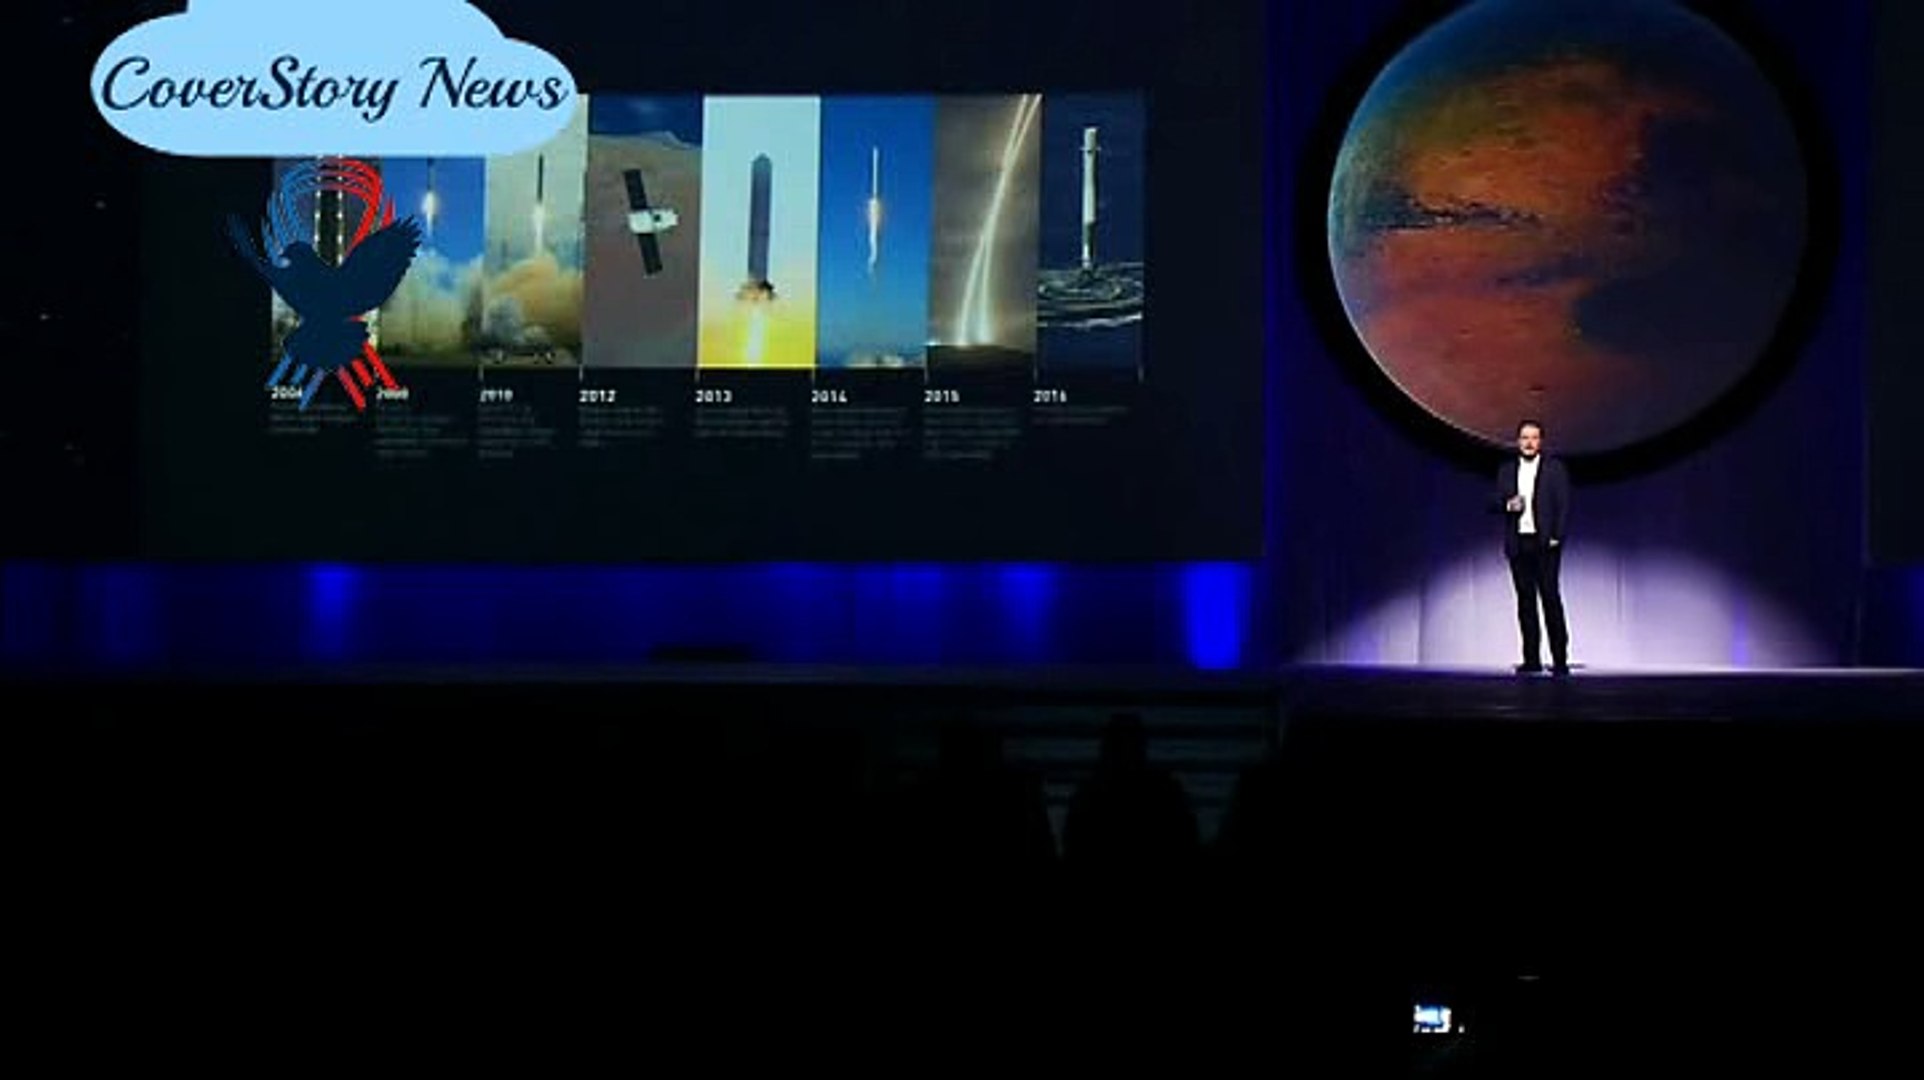 SpaceX announces plans to colonise Mars